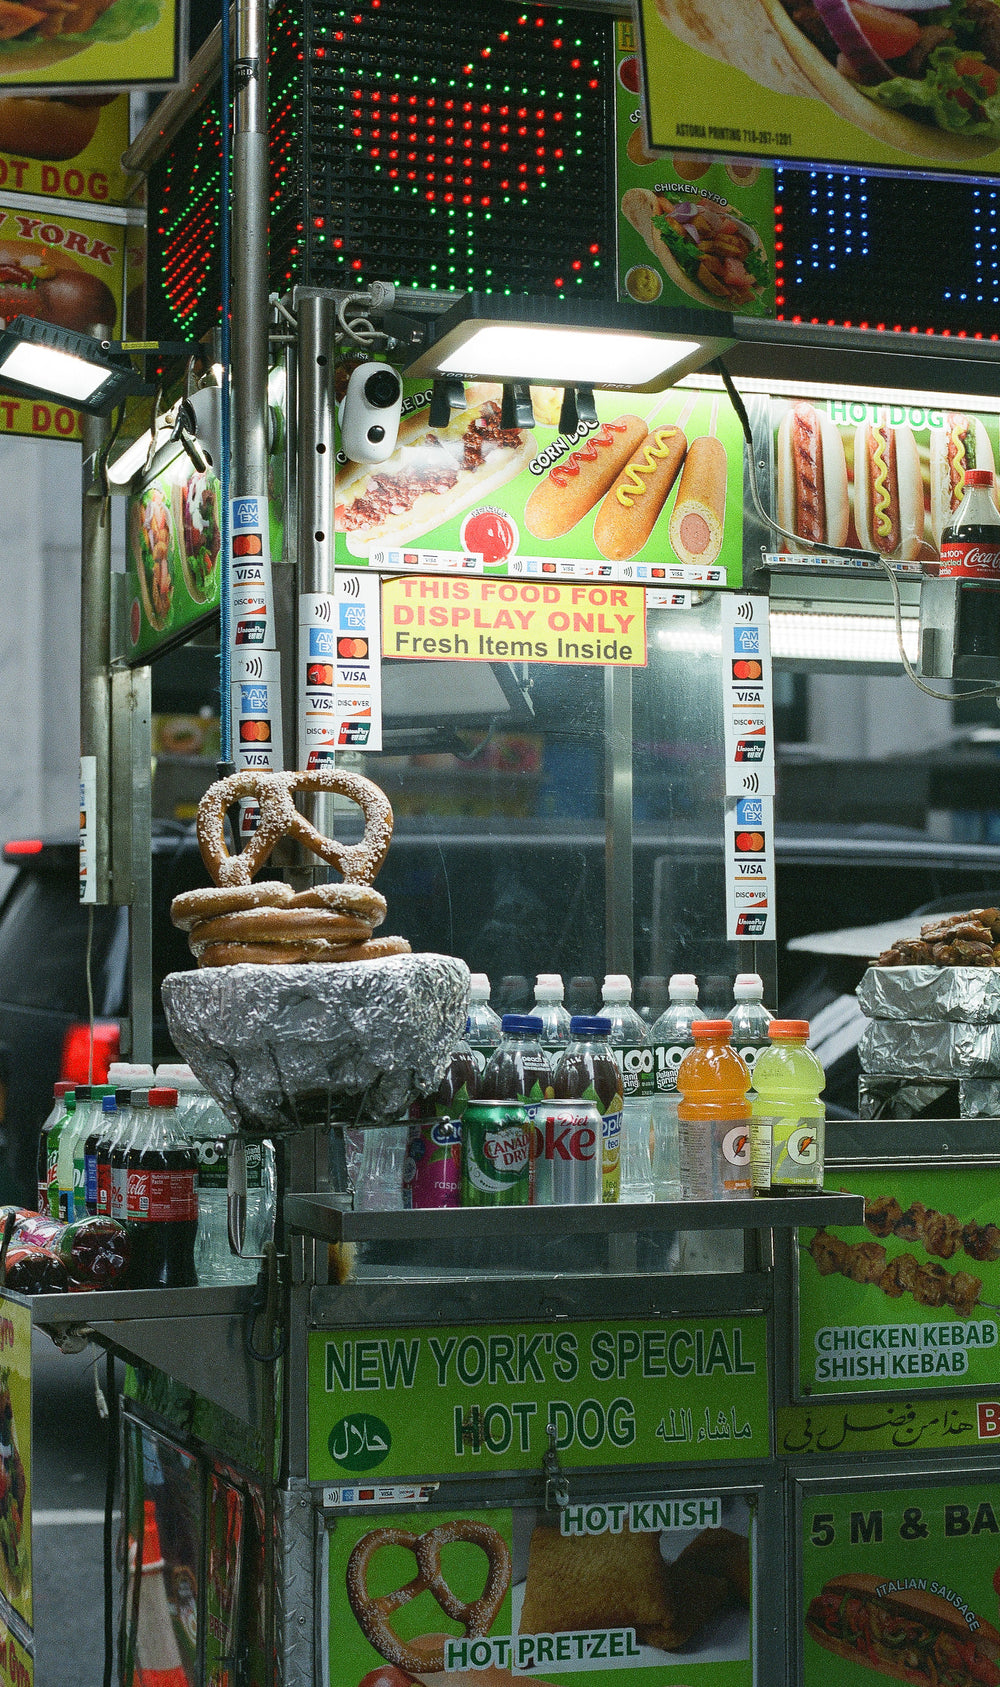 photographic image of a pretzel stand at night